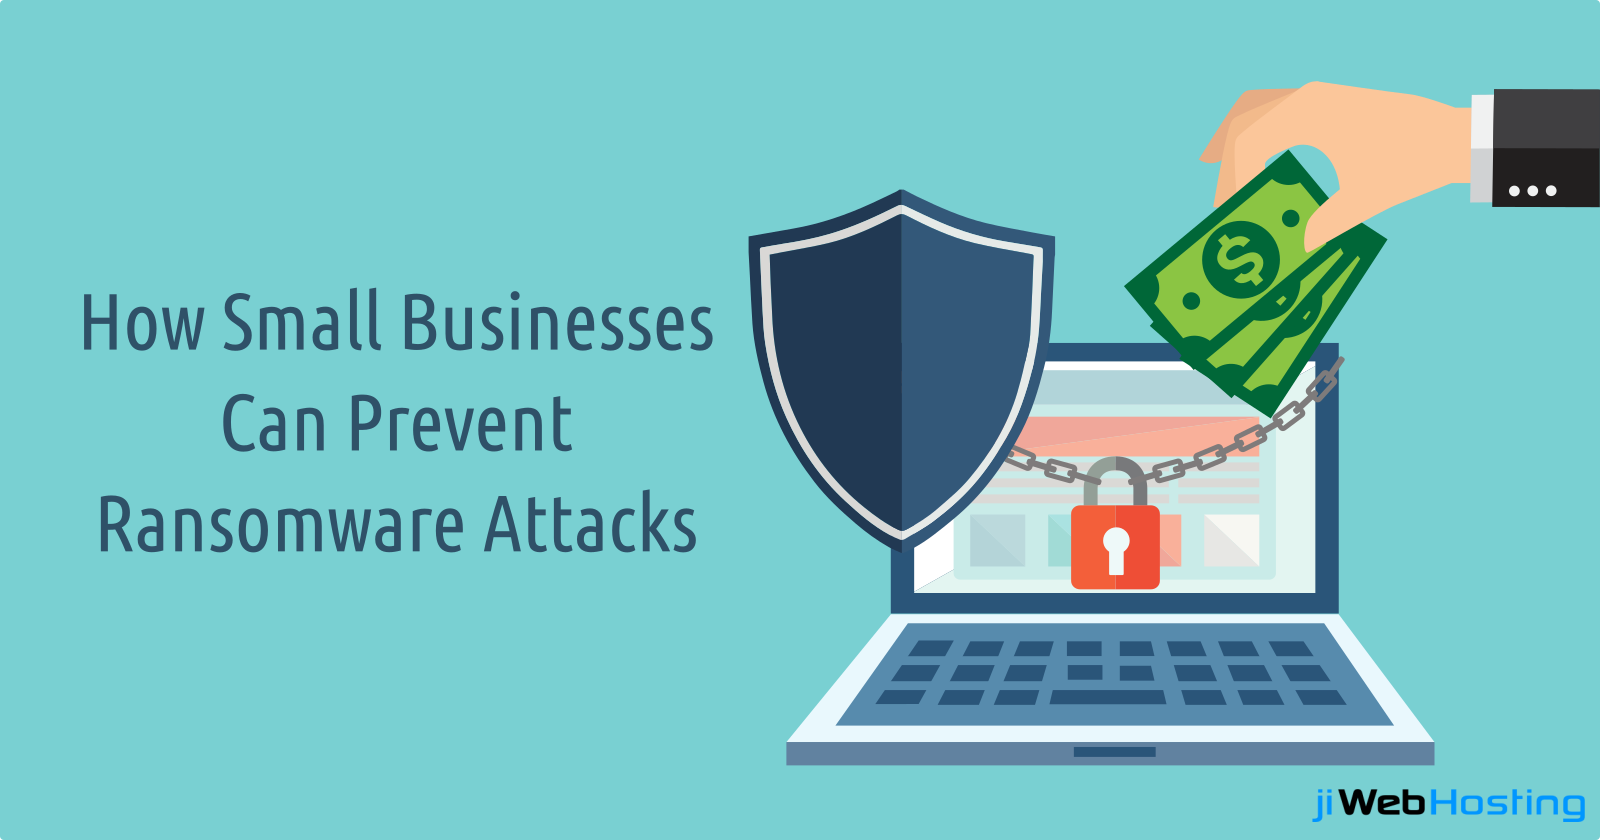 How Small Businesses Can Prevent Ransomware Attacks